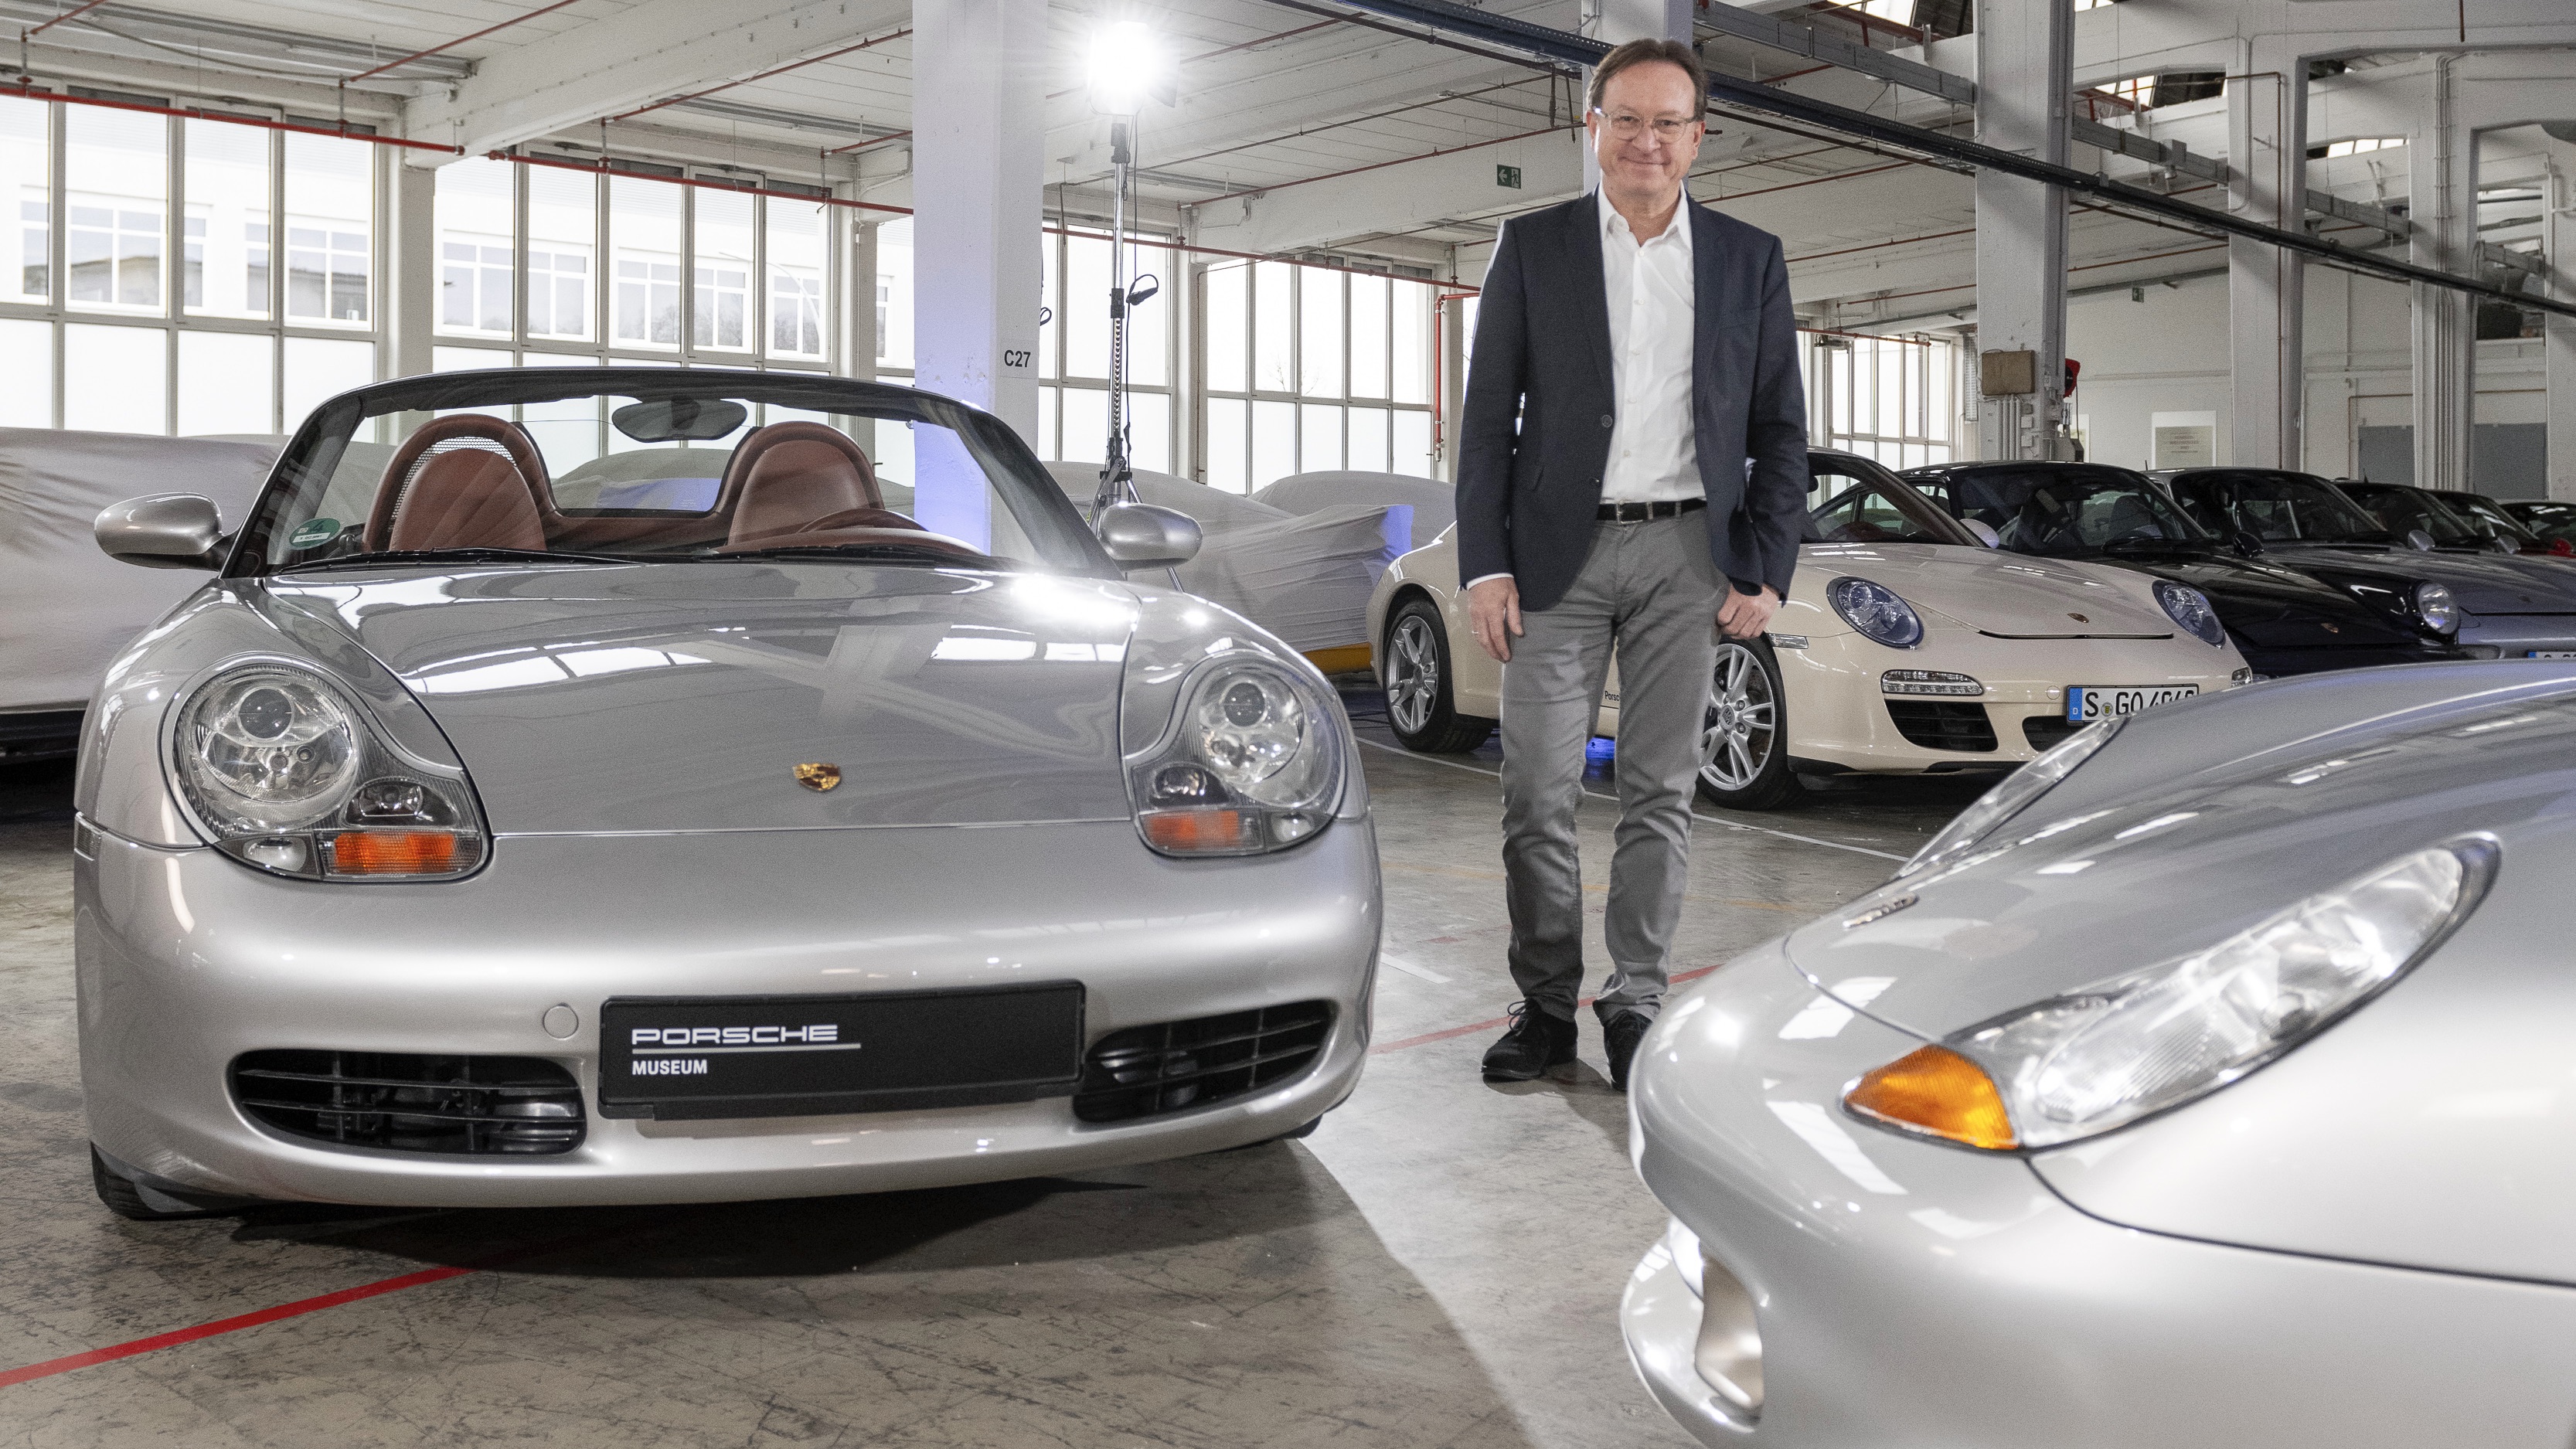 Grant Larson between two Boxsters at the Porsche Museum